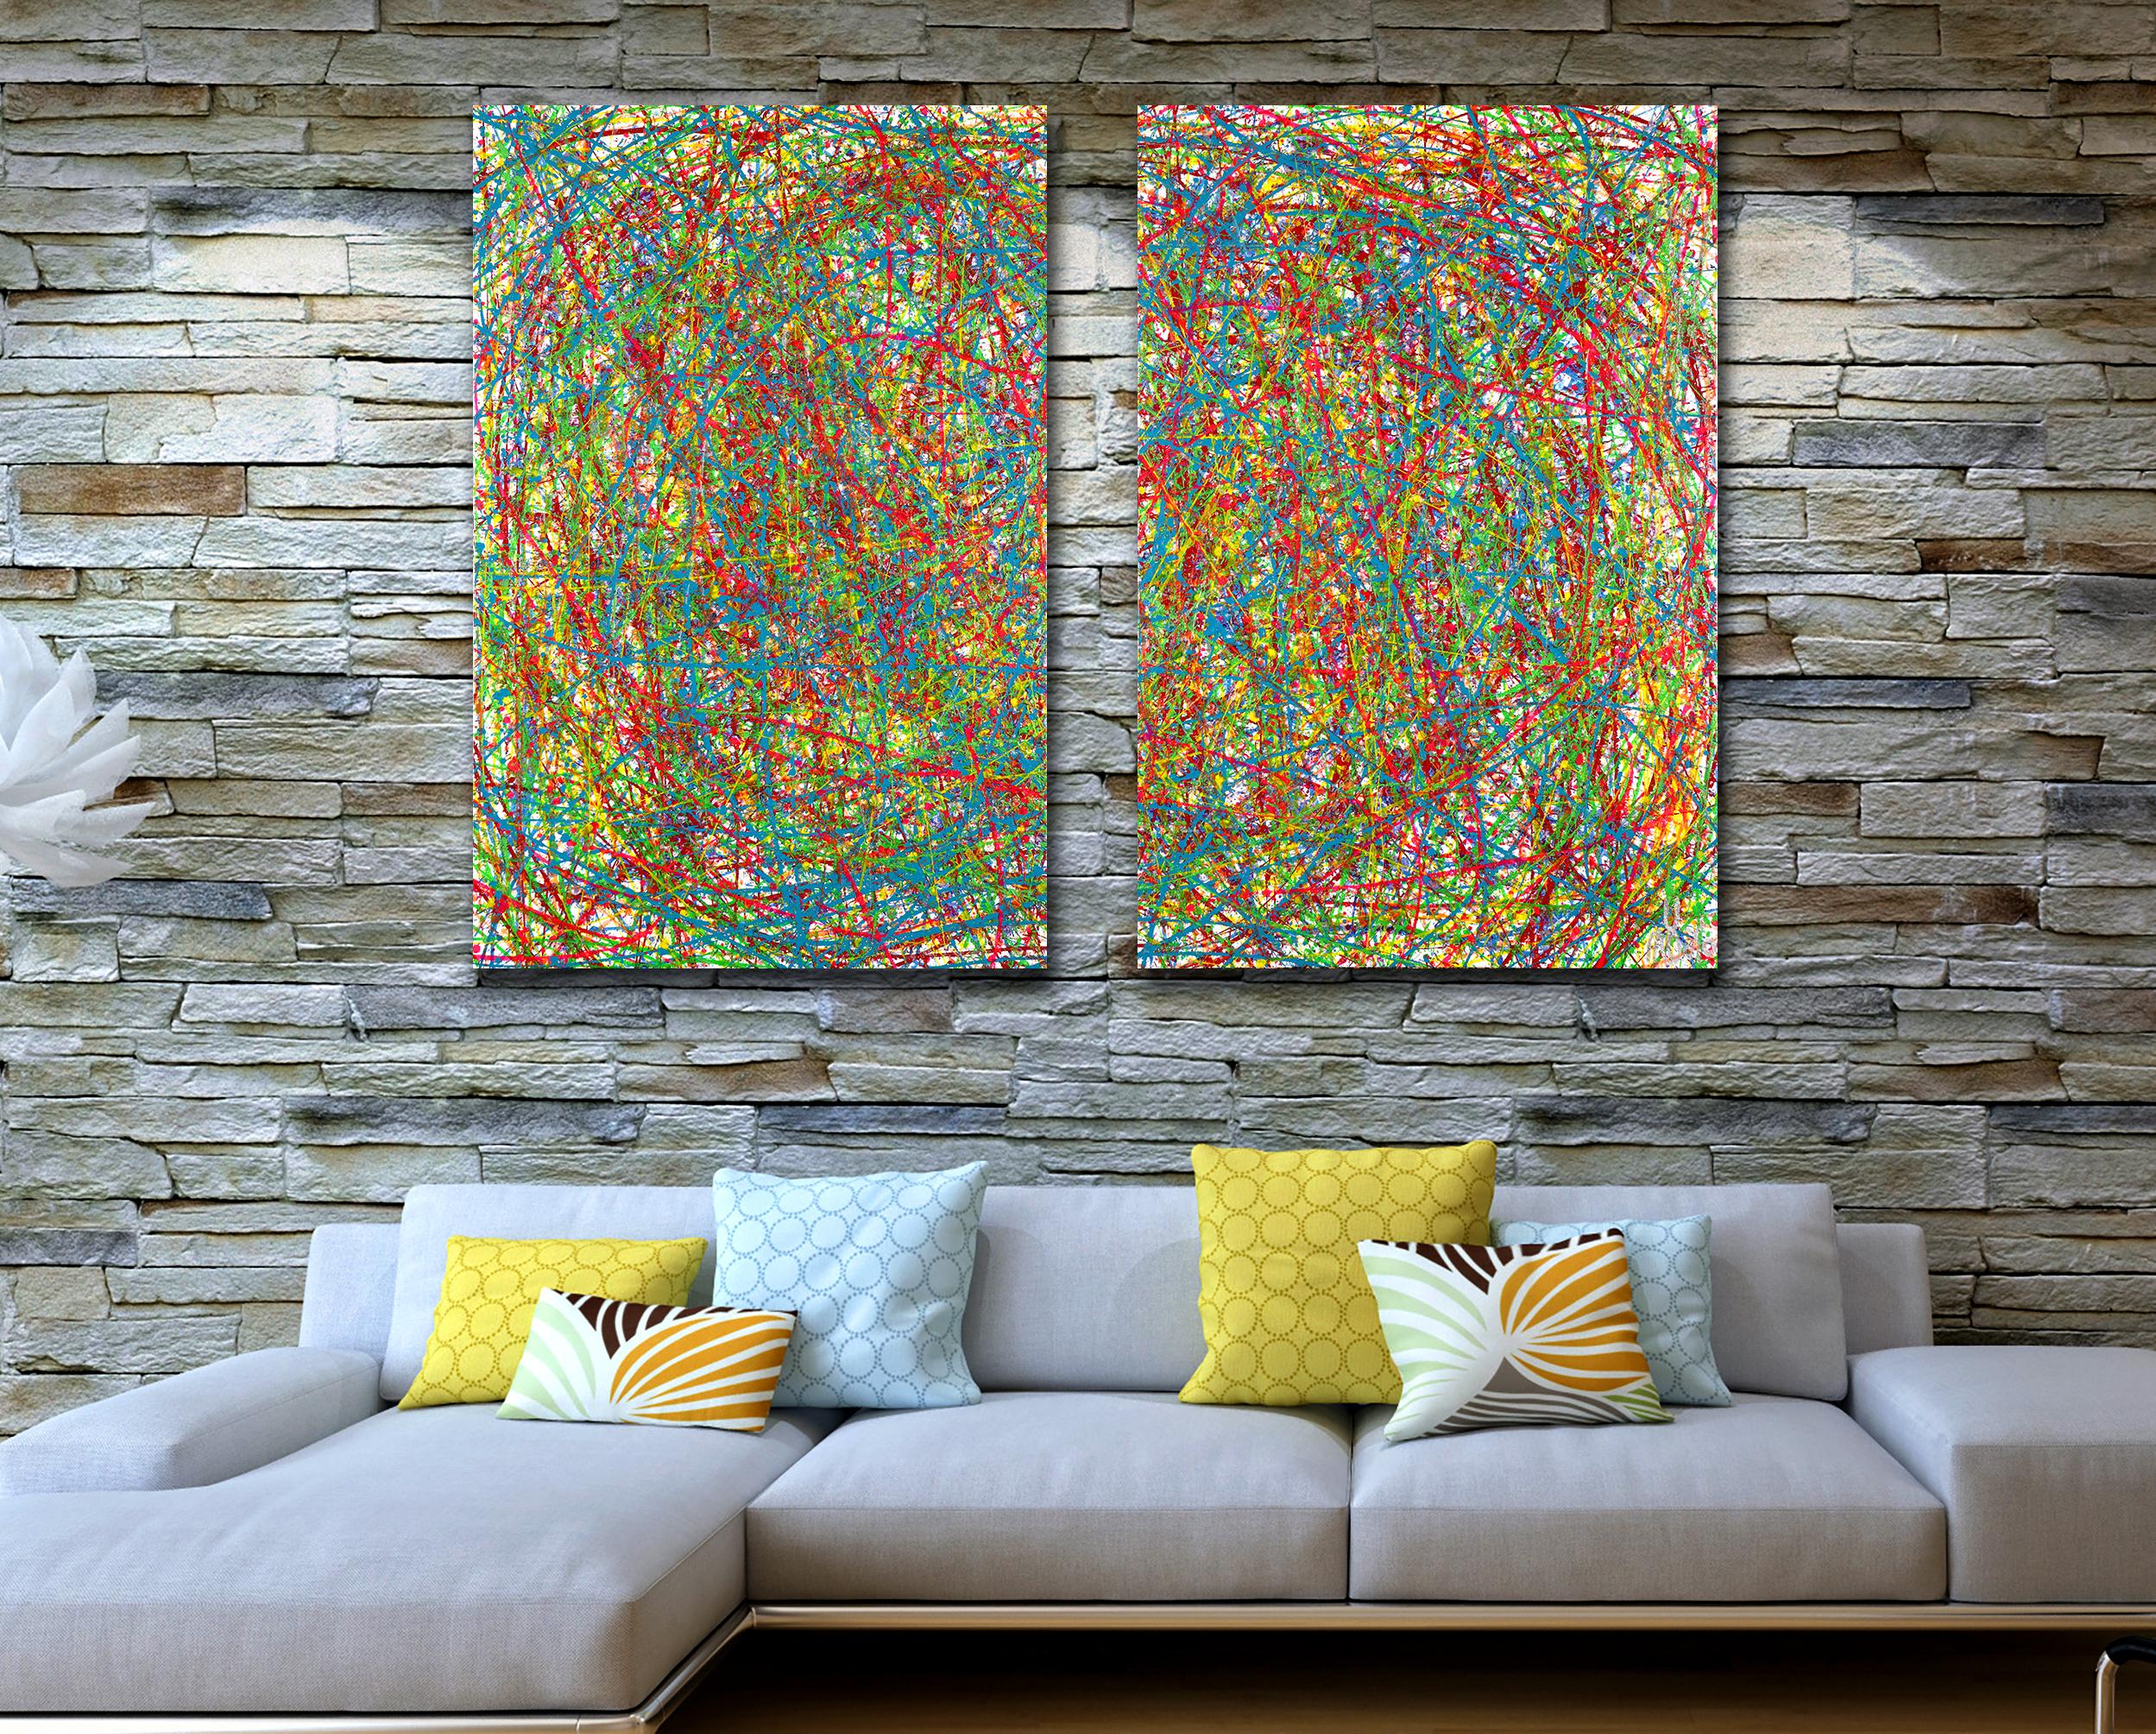 Colorful display of affection 2 (2021) / Diptych